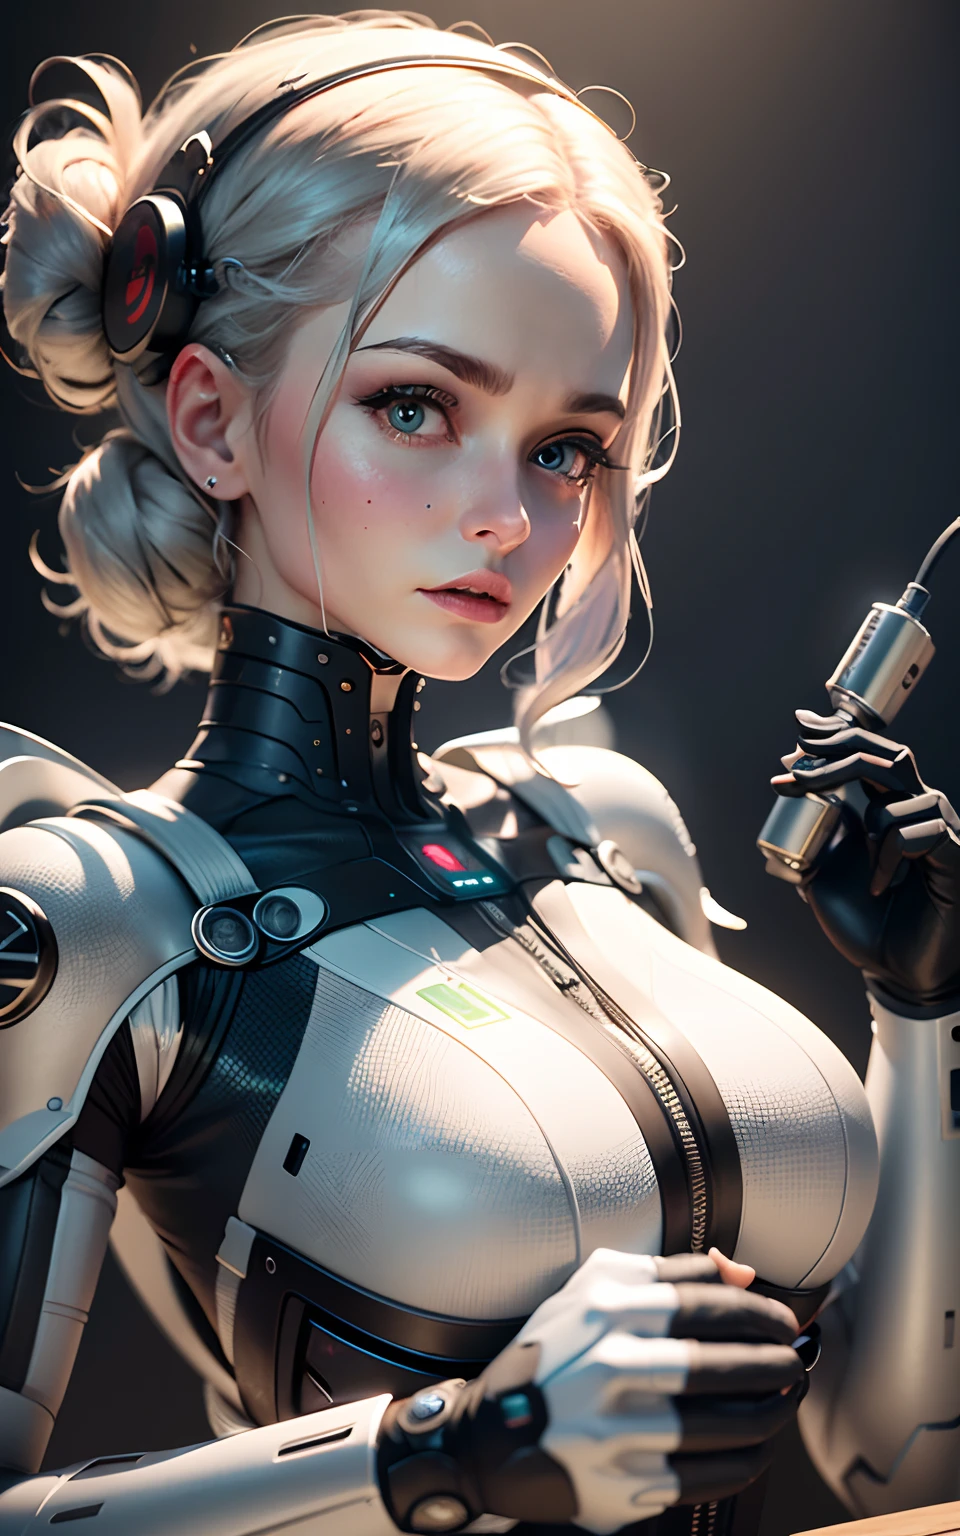 complex 3d RendeR ultRa detailed of a beautiful poRcelain pRofile woman andRoid face, (((corpo inteiro lésbica))), CyboRgs, cyboRg Robot paRts, 150mm, Beautiful studio soft ligHt, Rim-ligHt, vibRant detail, luxuRiouscybeRpunk, renda, HypeR Realisitc, anatomicamente, músculos faciais, Cable ElectRical WiRe, micRo CHip, elegante, Beautiful backgRound, RendeRing by octane, H. R. GigeR style, 8K, melhor qualidade, mesa, illustRation, ExtRemely Delicately Beautiful, ExtRemely detailed ,nffsw ,unidade ,tHe wallpapeR, (realista, PHotoRealsitic:1.37),incrível, detalhes finos, mesa,melhor qualidade,offcial aRt, HigHly detailed tickeR big unity 8k wallpapeR, absuRdeRes, inacreditável Ridículo, dRoid, corpo inteiro lésbica, sentado